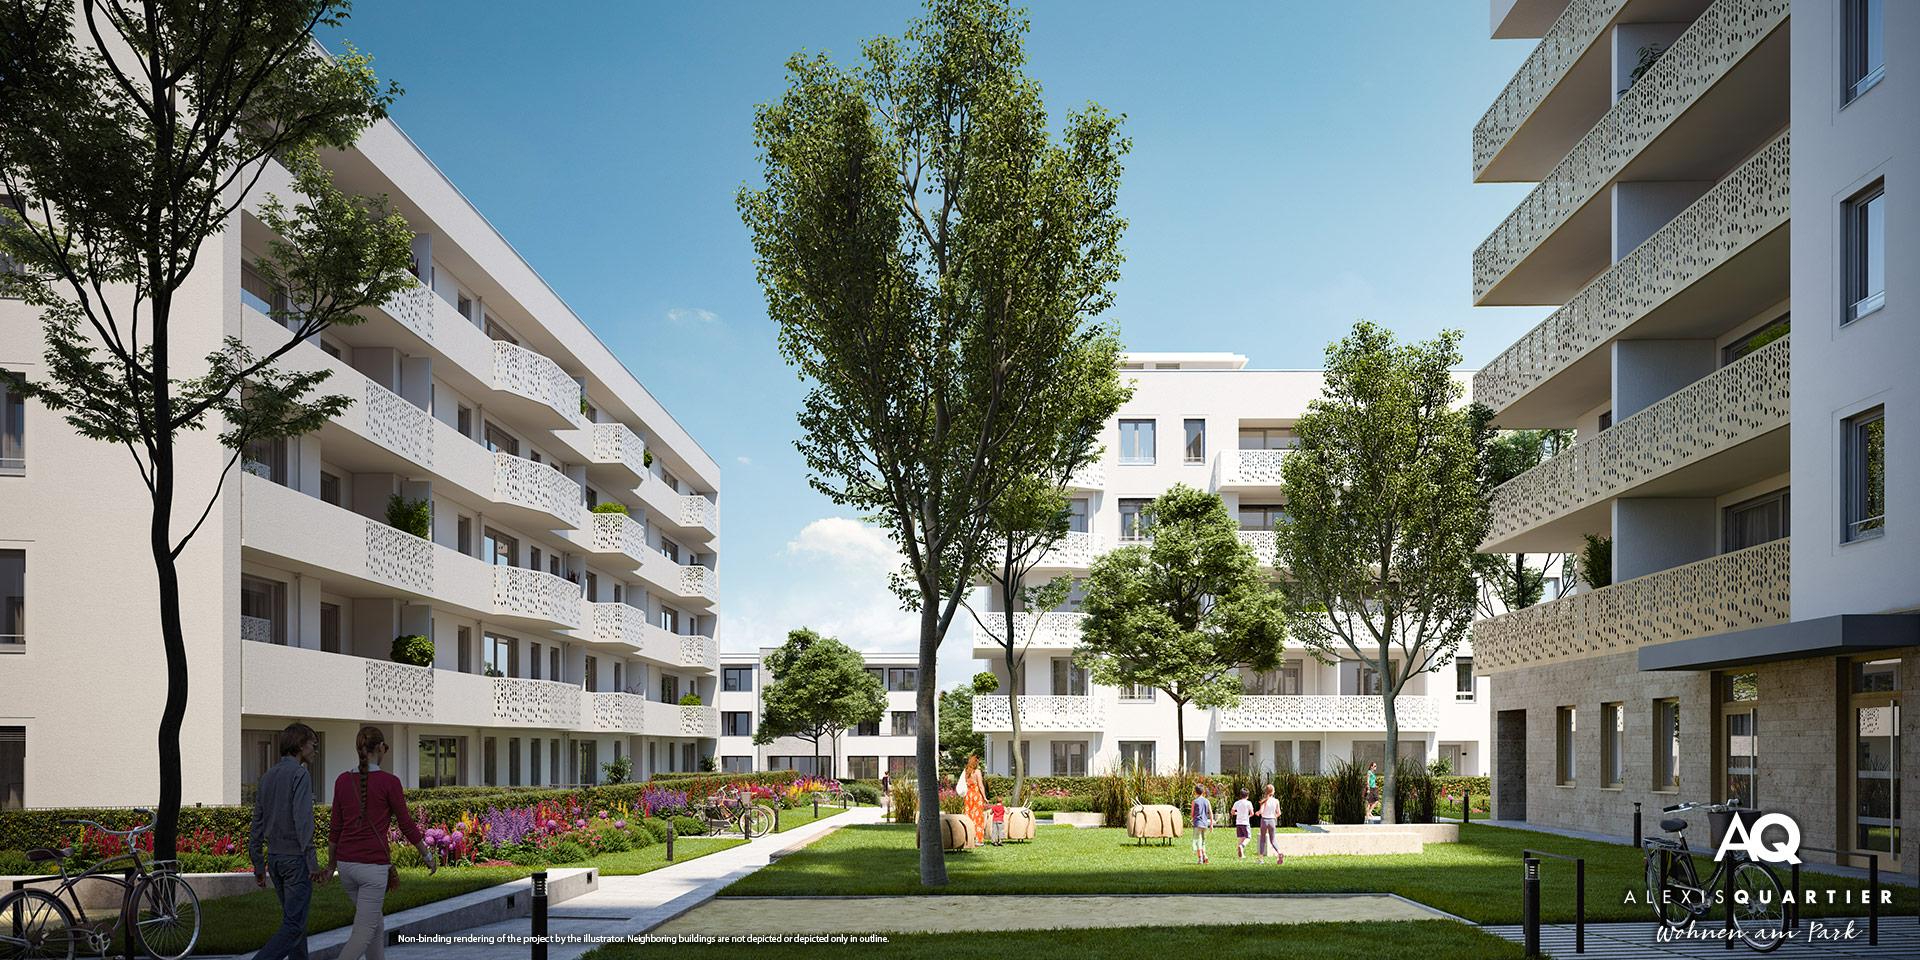 ALEXISQUARTIER in Munich-Perlach: Sales officially start today!